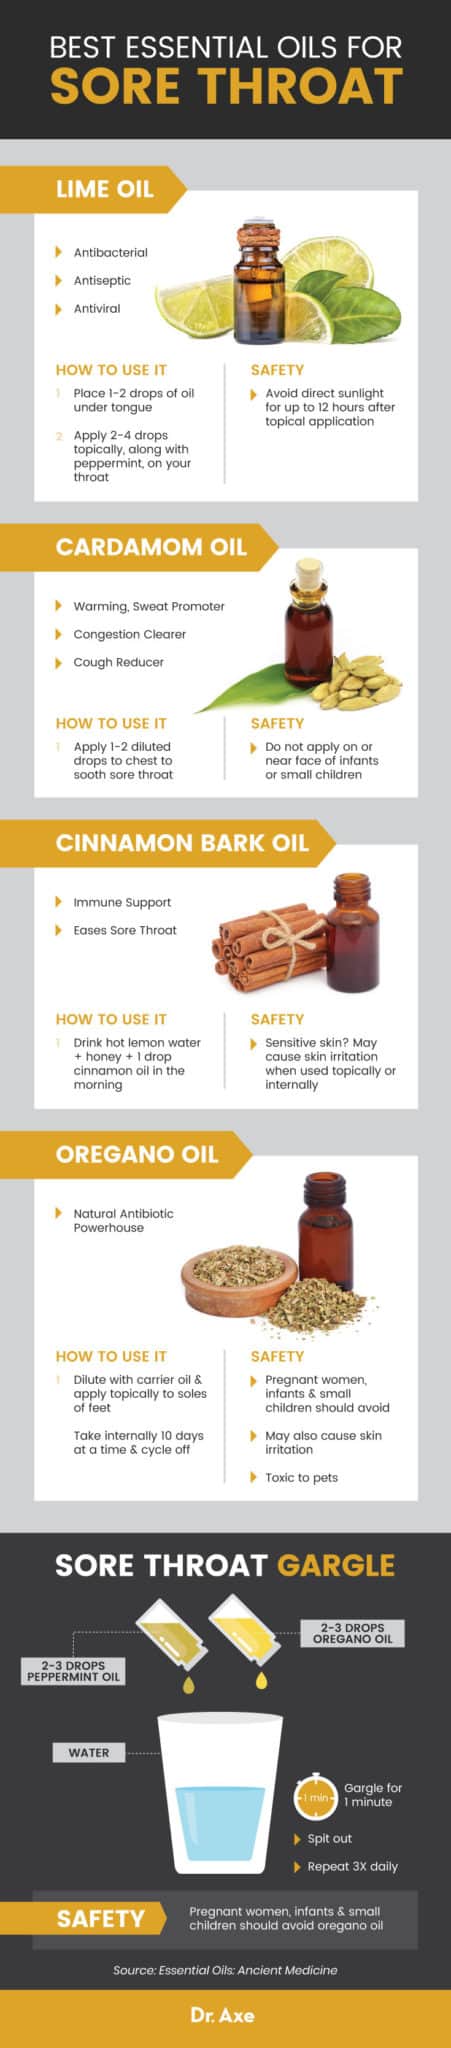 A Guide to the Best Essential Oils for Winter & Fall - Dr. Axe